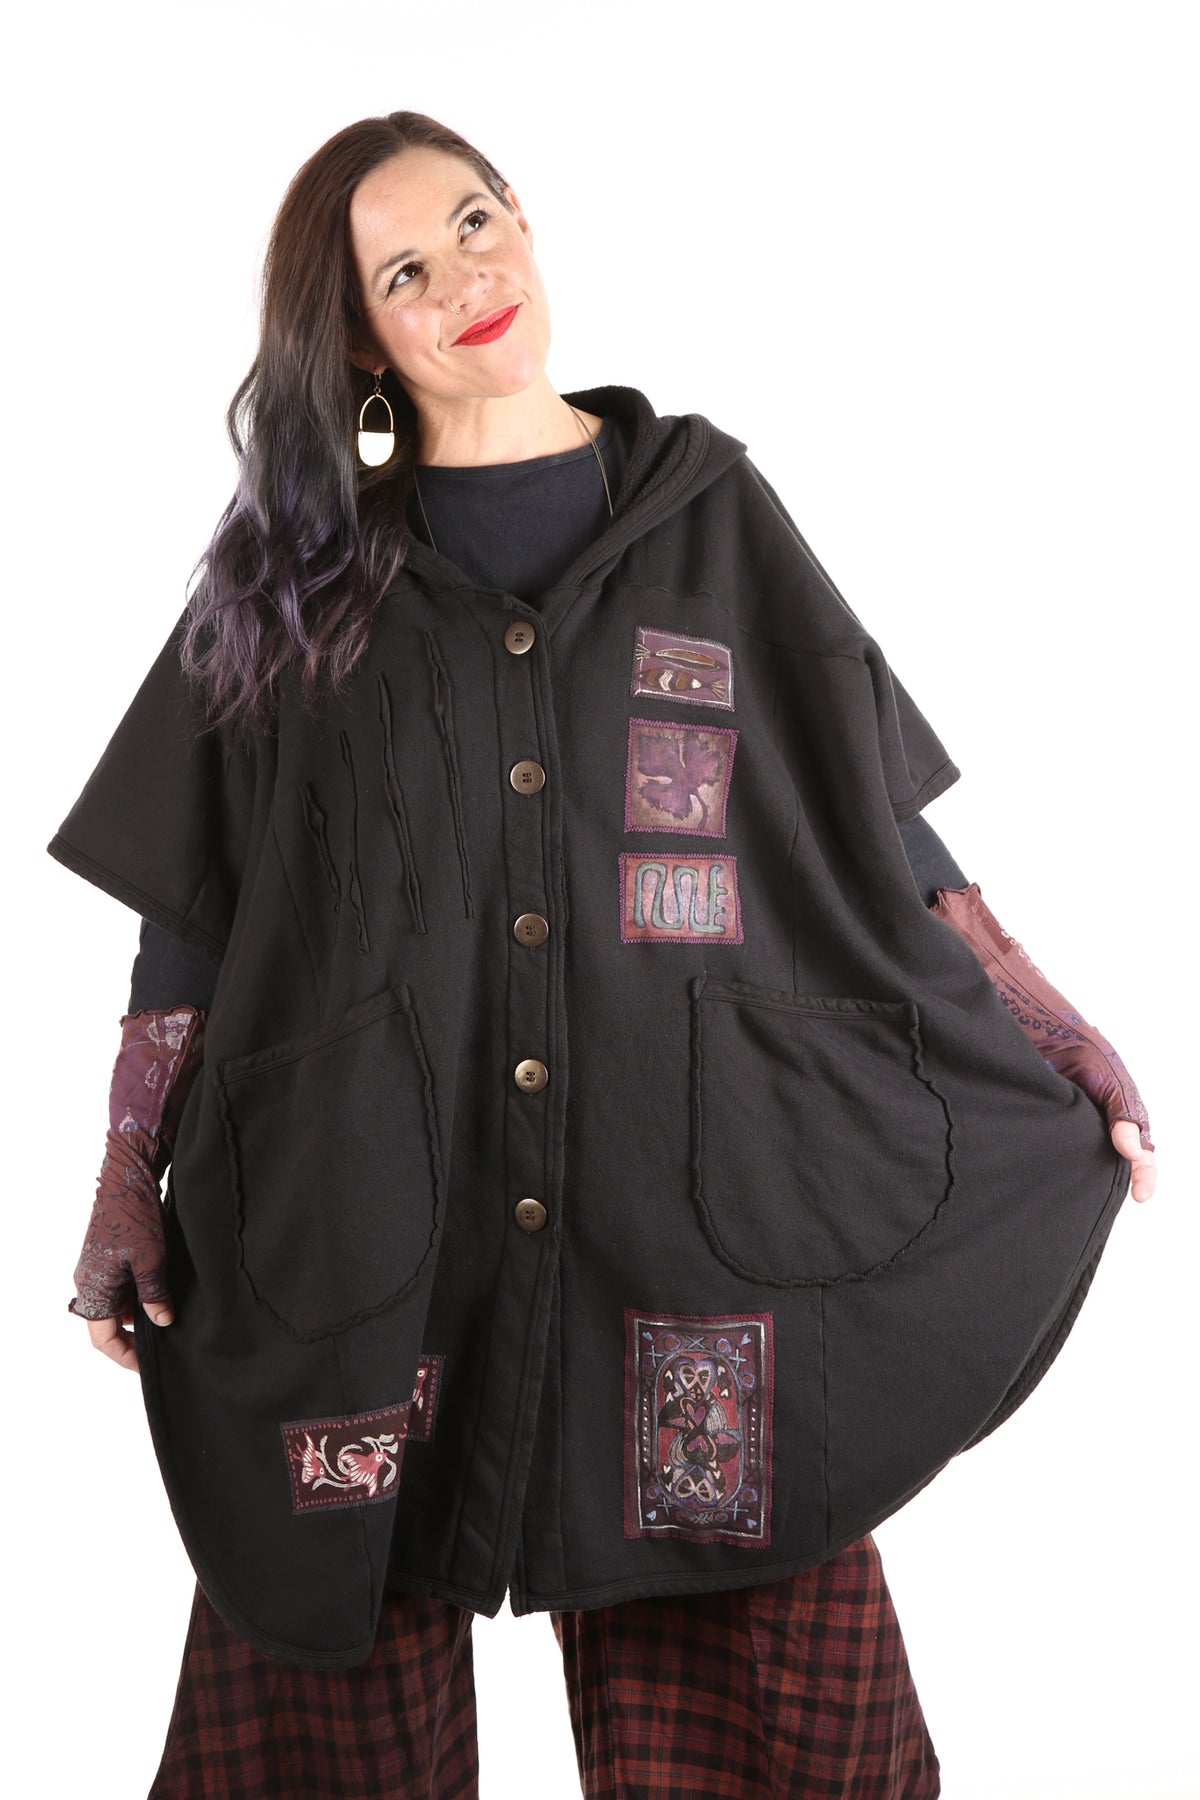 5258 -Raw Edge Hooded Cape - Black-Whimsy Mix Patched #1